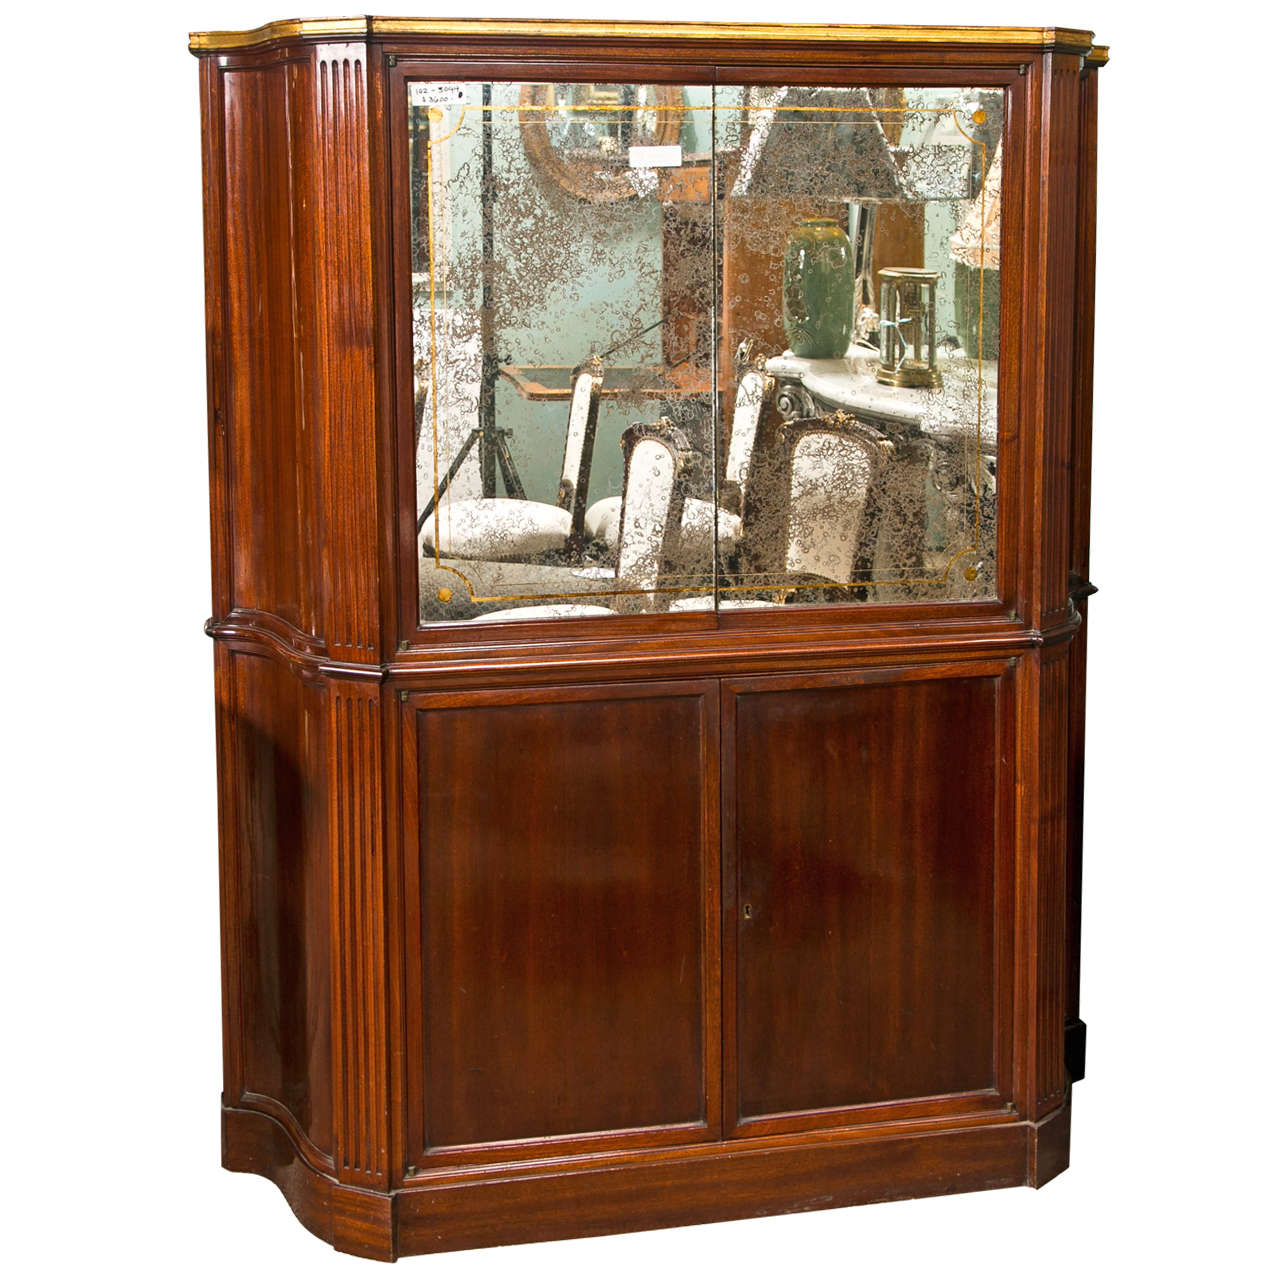 Art Deco Style Mahogany French Bar Or Serving Cabinet Distressed Mirror Doors